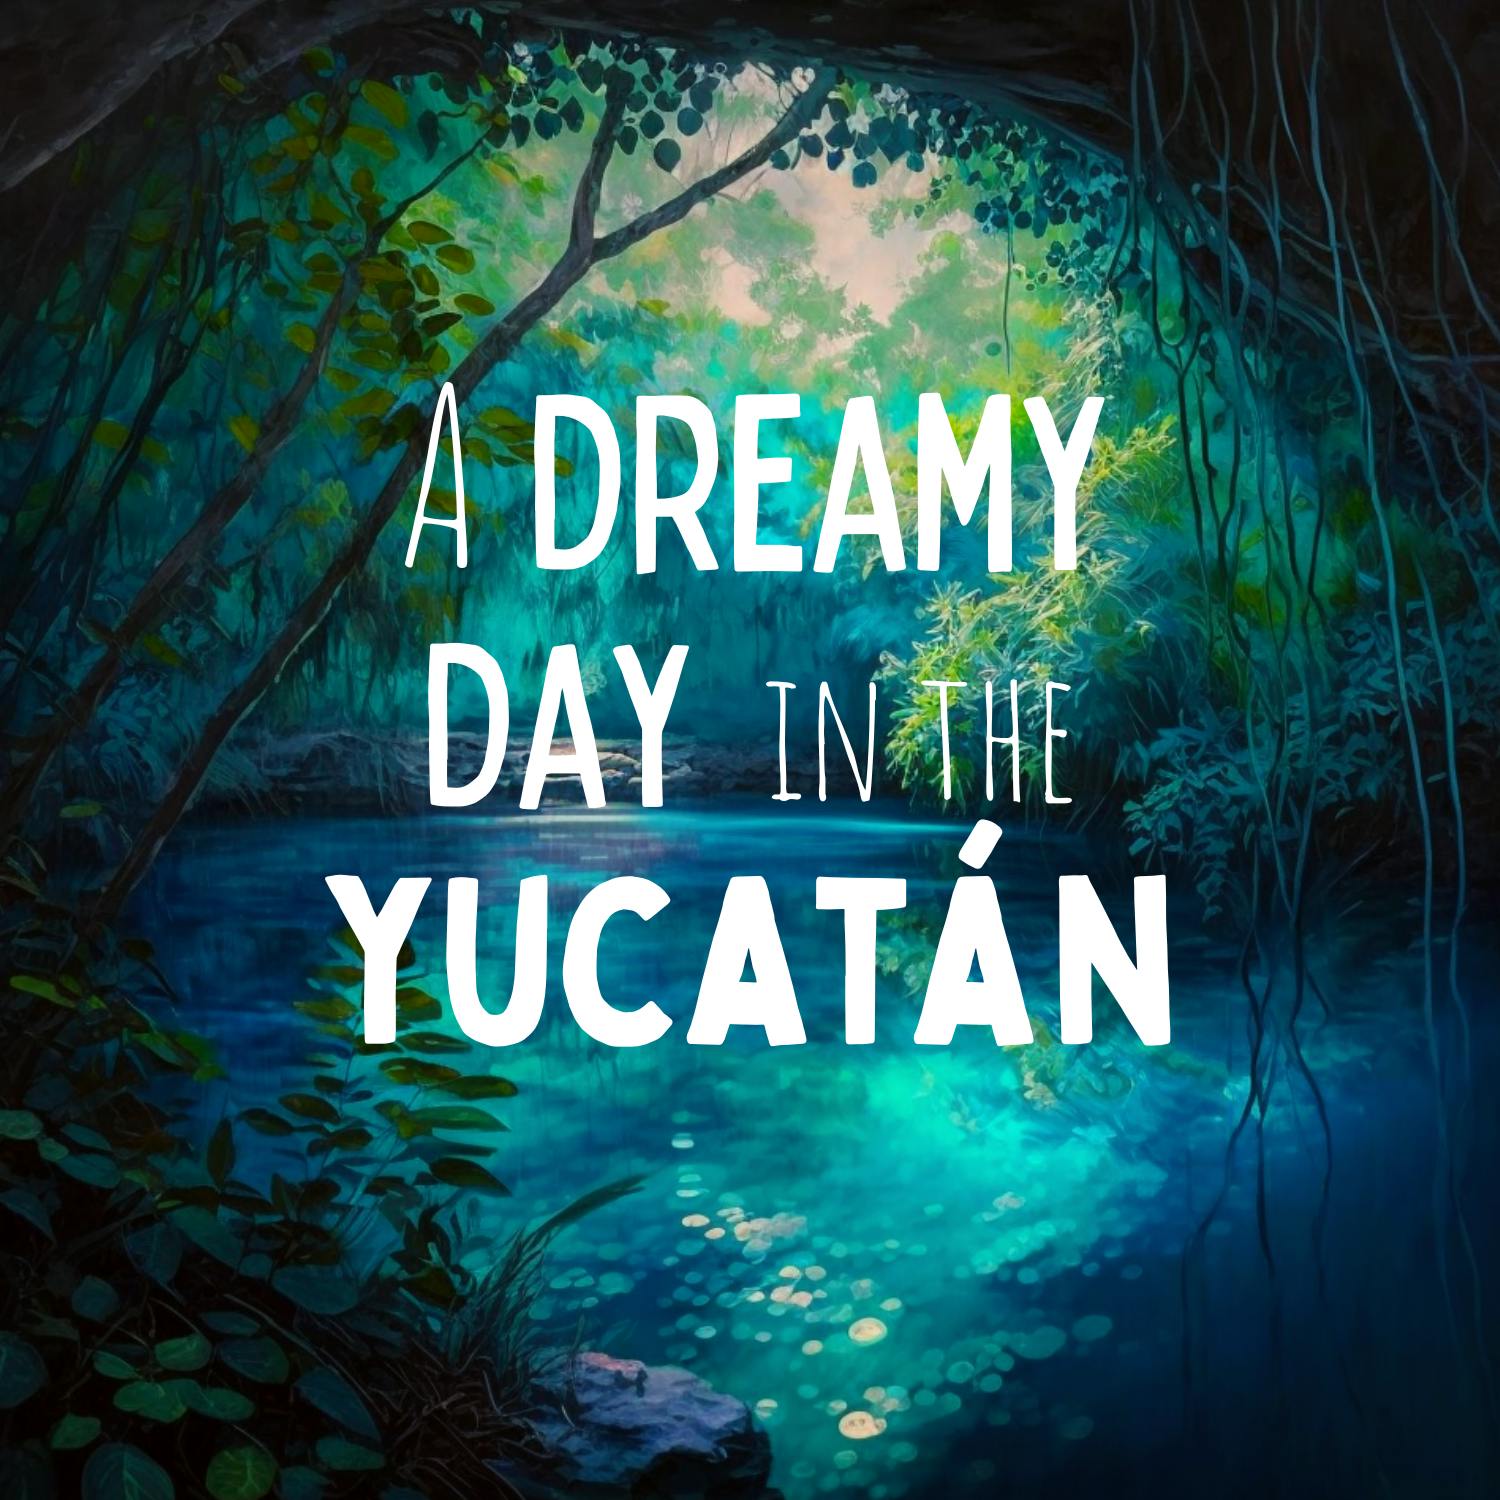 A Dreamy Day in the Yucatán